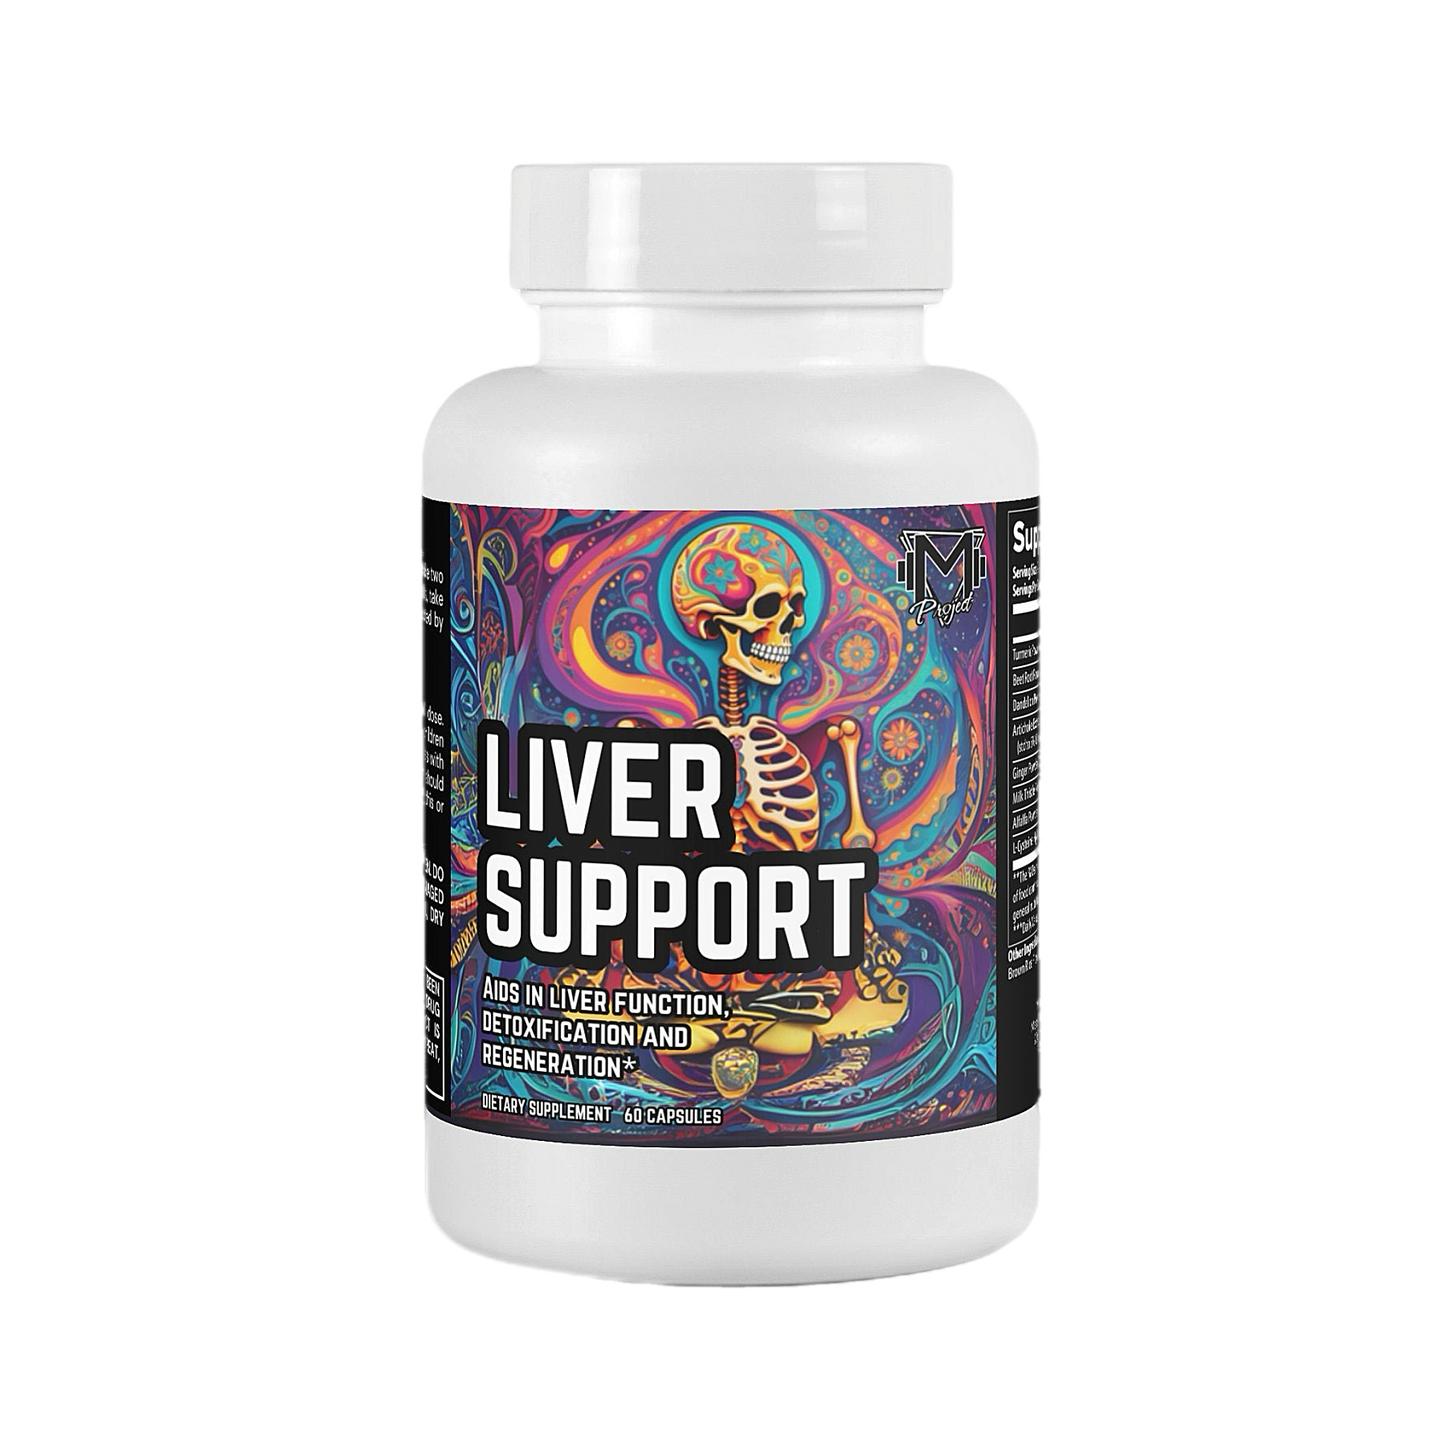 Liver Support by Project M